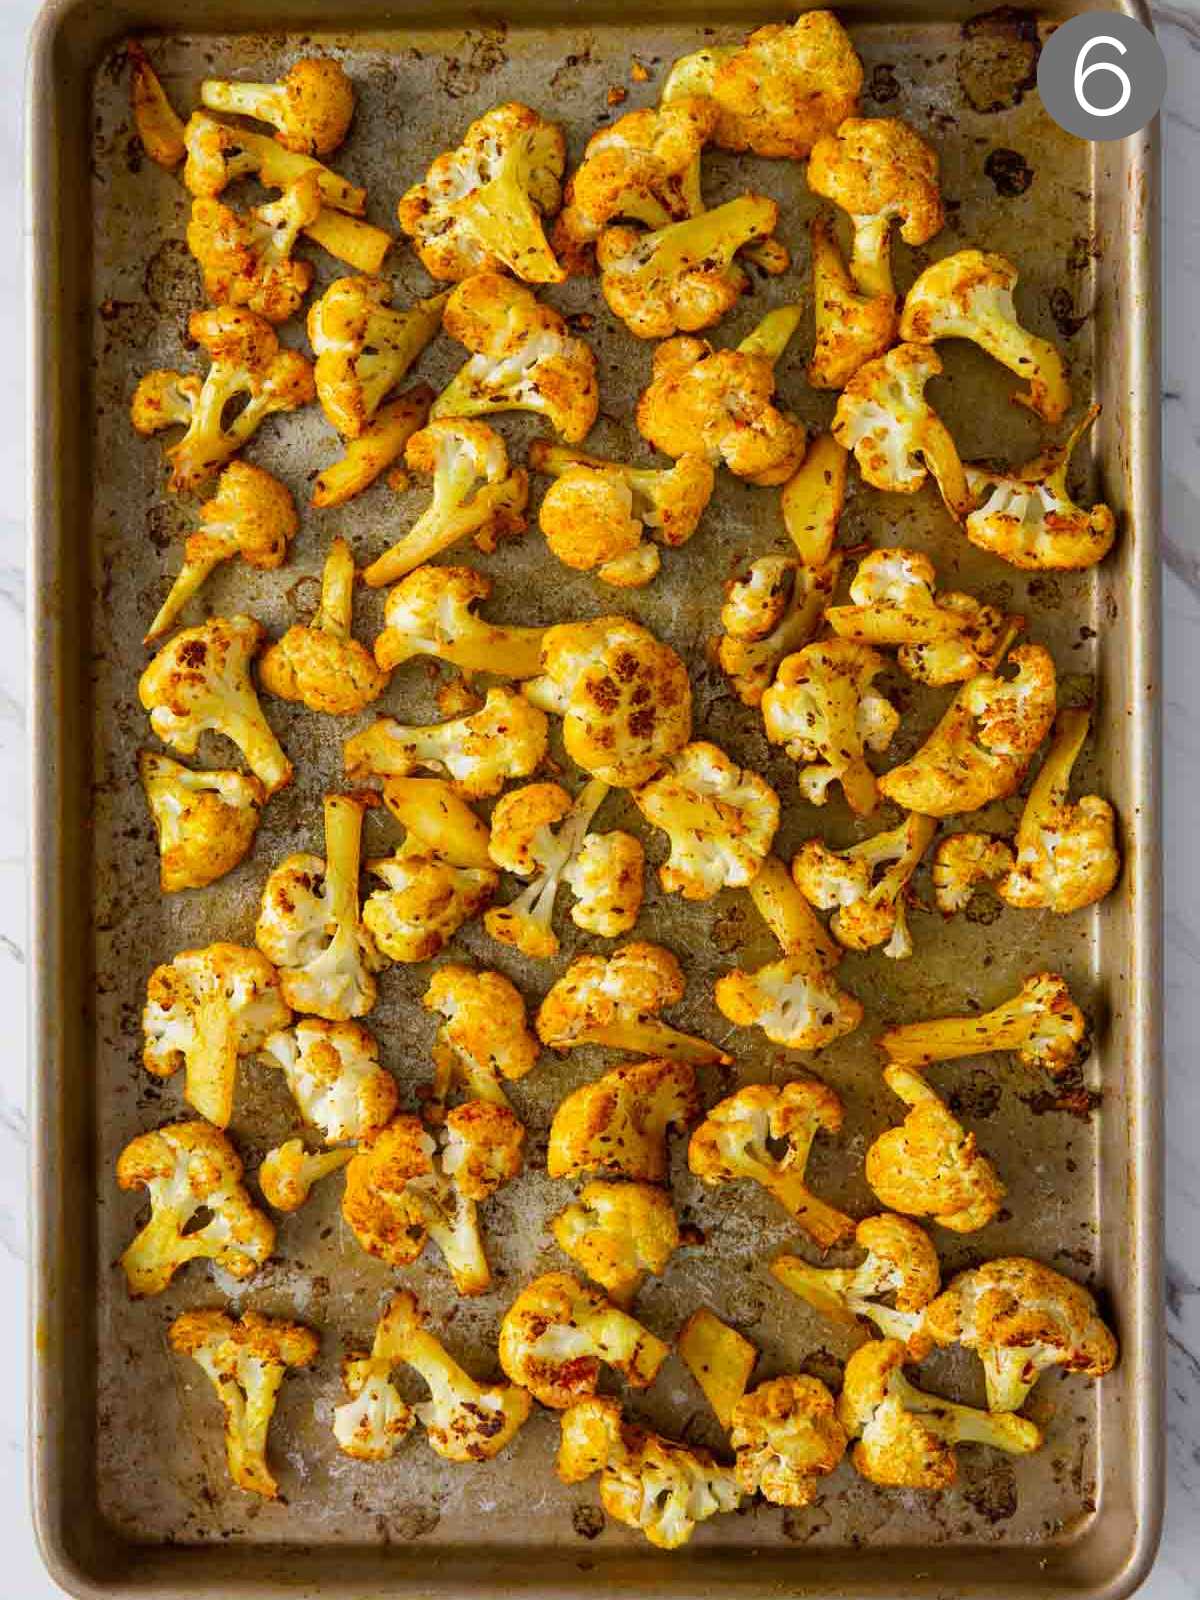 Turmeric roasted cauliflower on a baking tray after baking is complete.